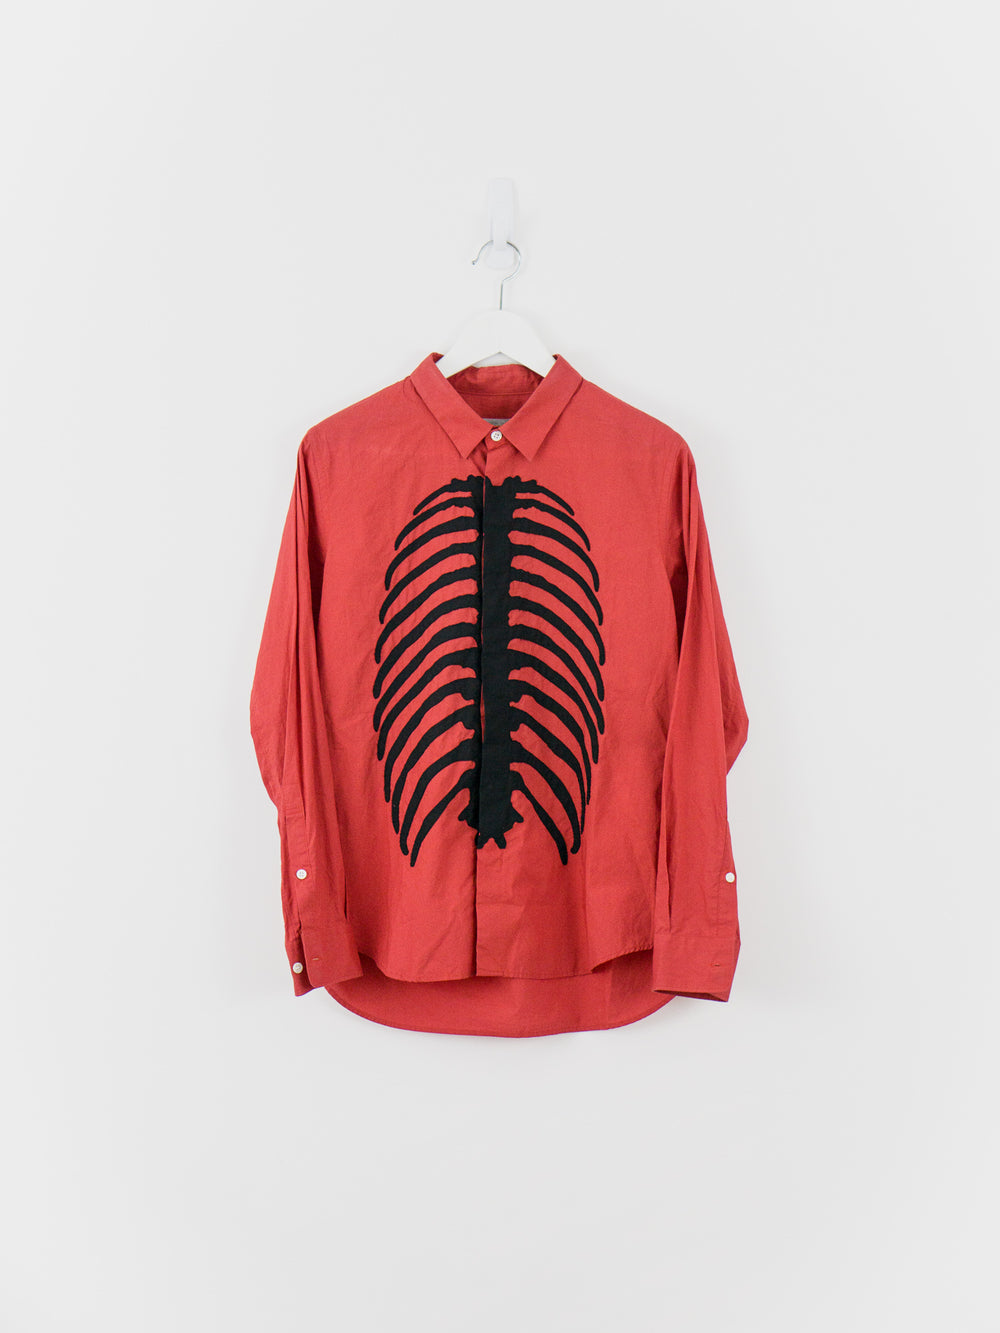 Undercover AW13 Ribcage Dress Shirt